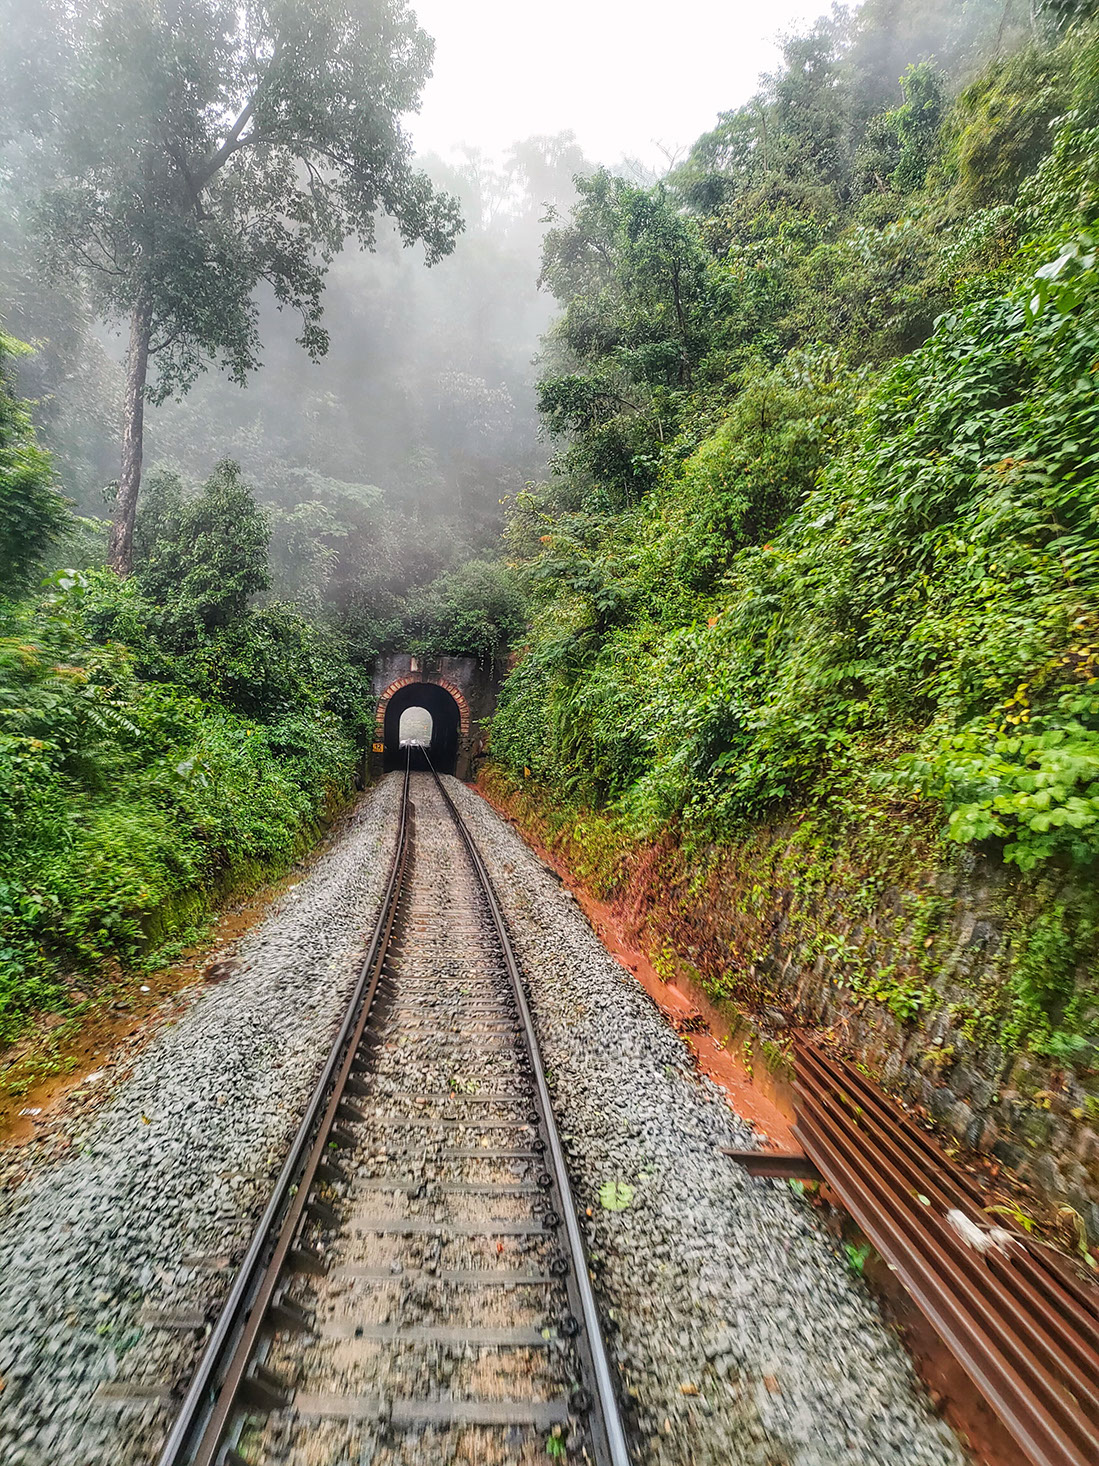 One of the 57 tunnels with green mountains and foggy weather